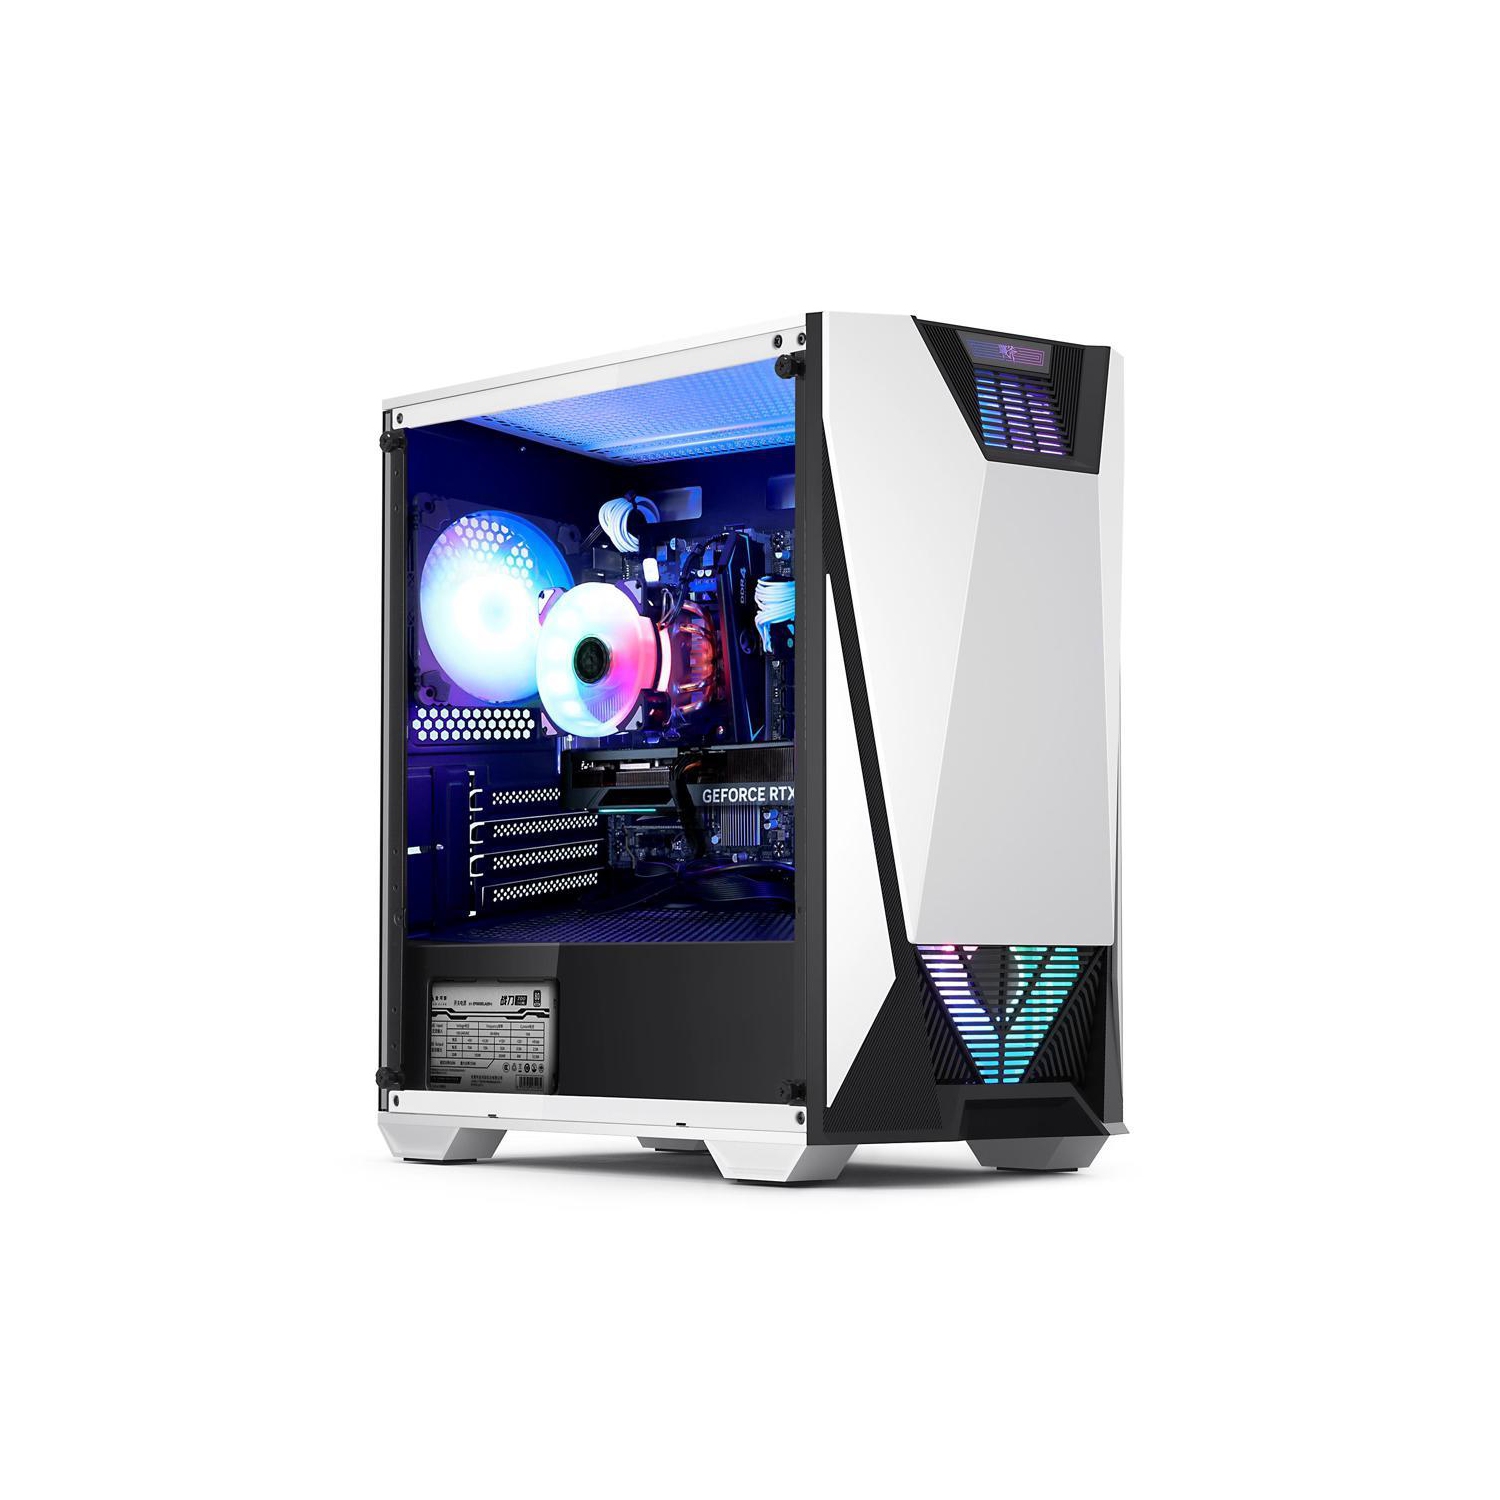 Hoengager Battleaxe Gaming - Intel Core i5-12600K 10-Core 3.7GHz-NVIDIA GeForce RTX 3060 Ti- 16GB DDR4 3200MHz - 2TB+500GB M.2 NVMe SSD- WIFI -RGB Fans - Windows 11 Pro Computer